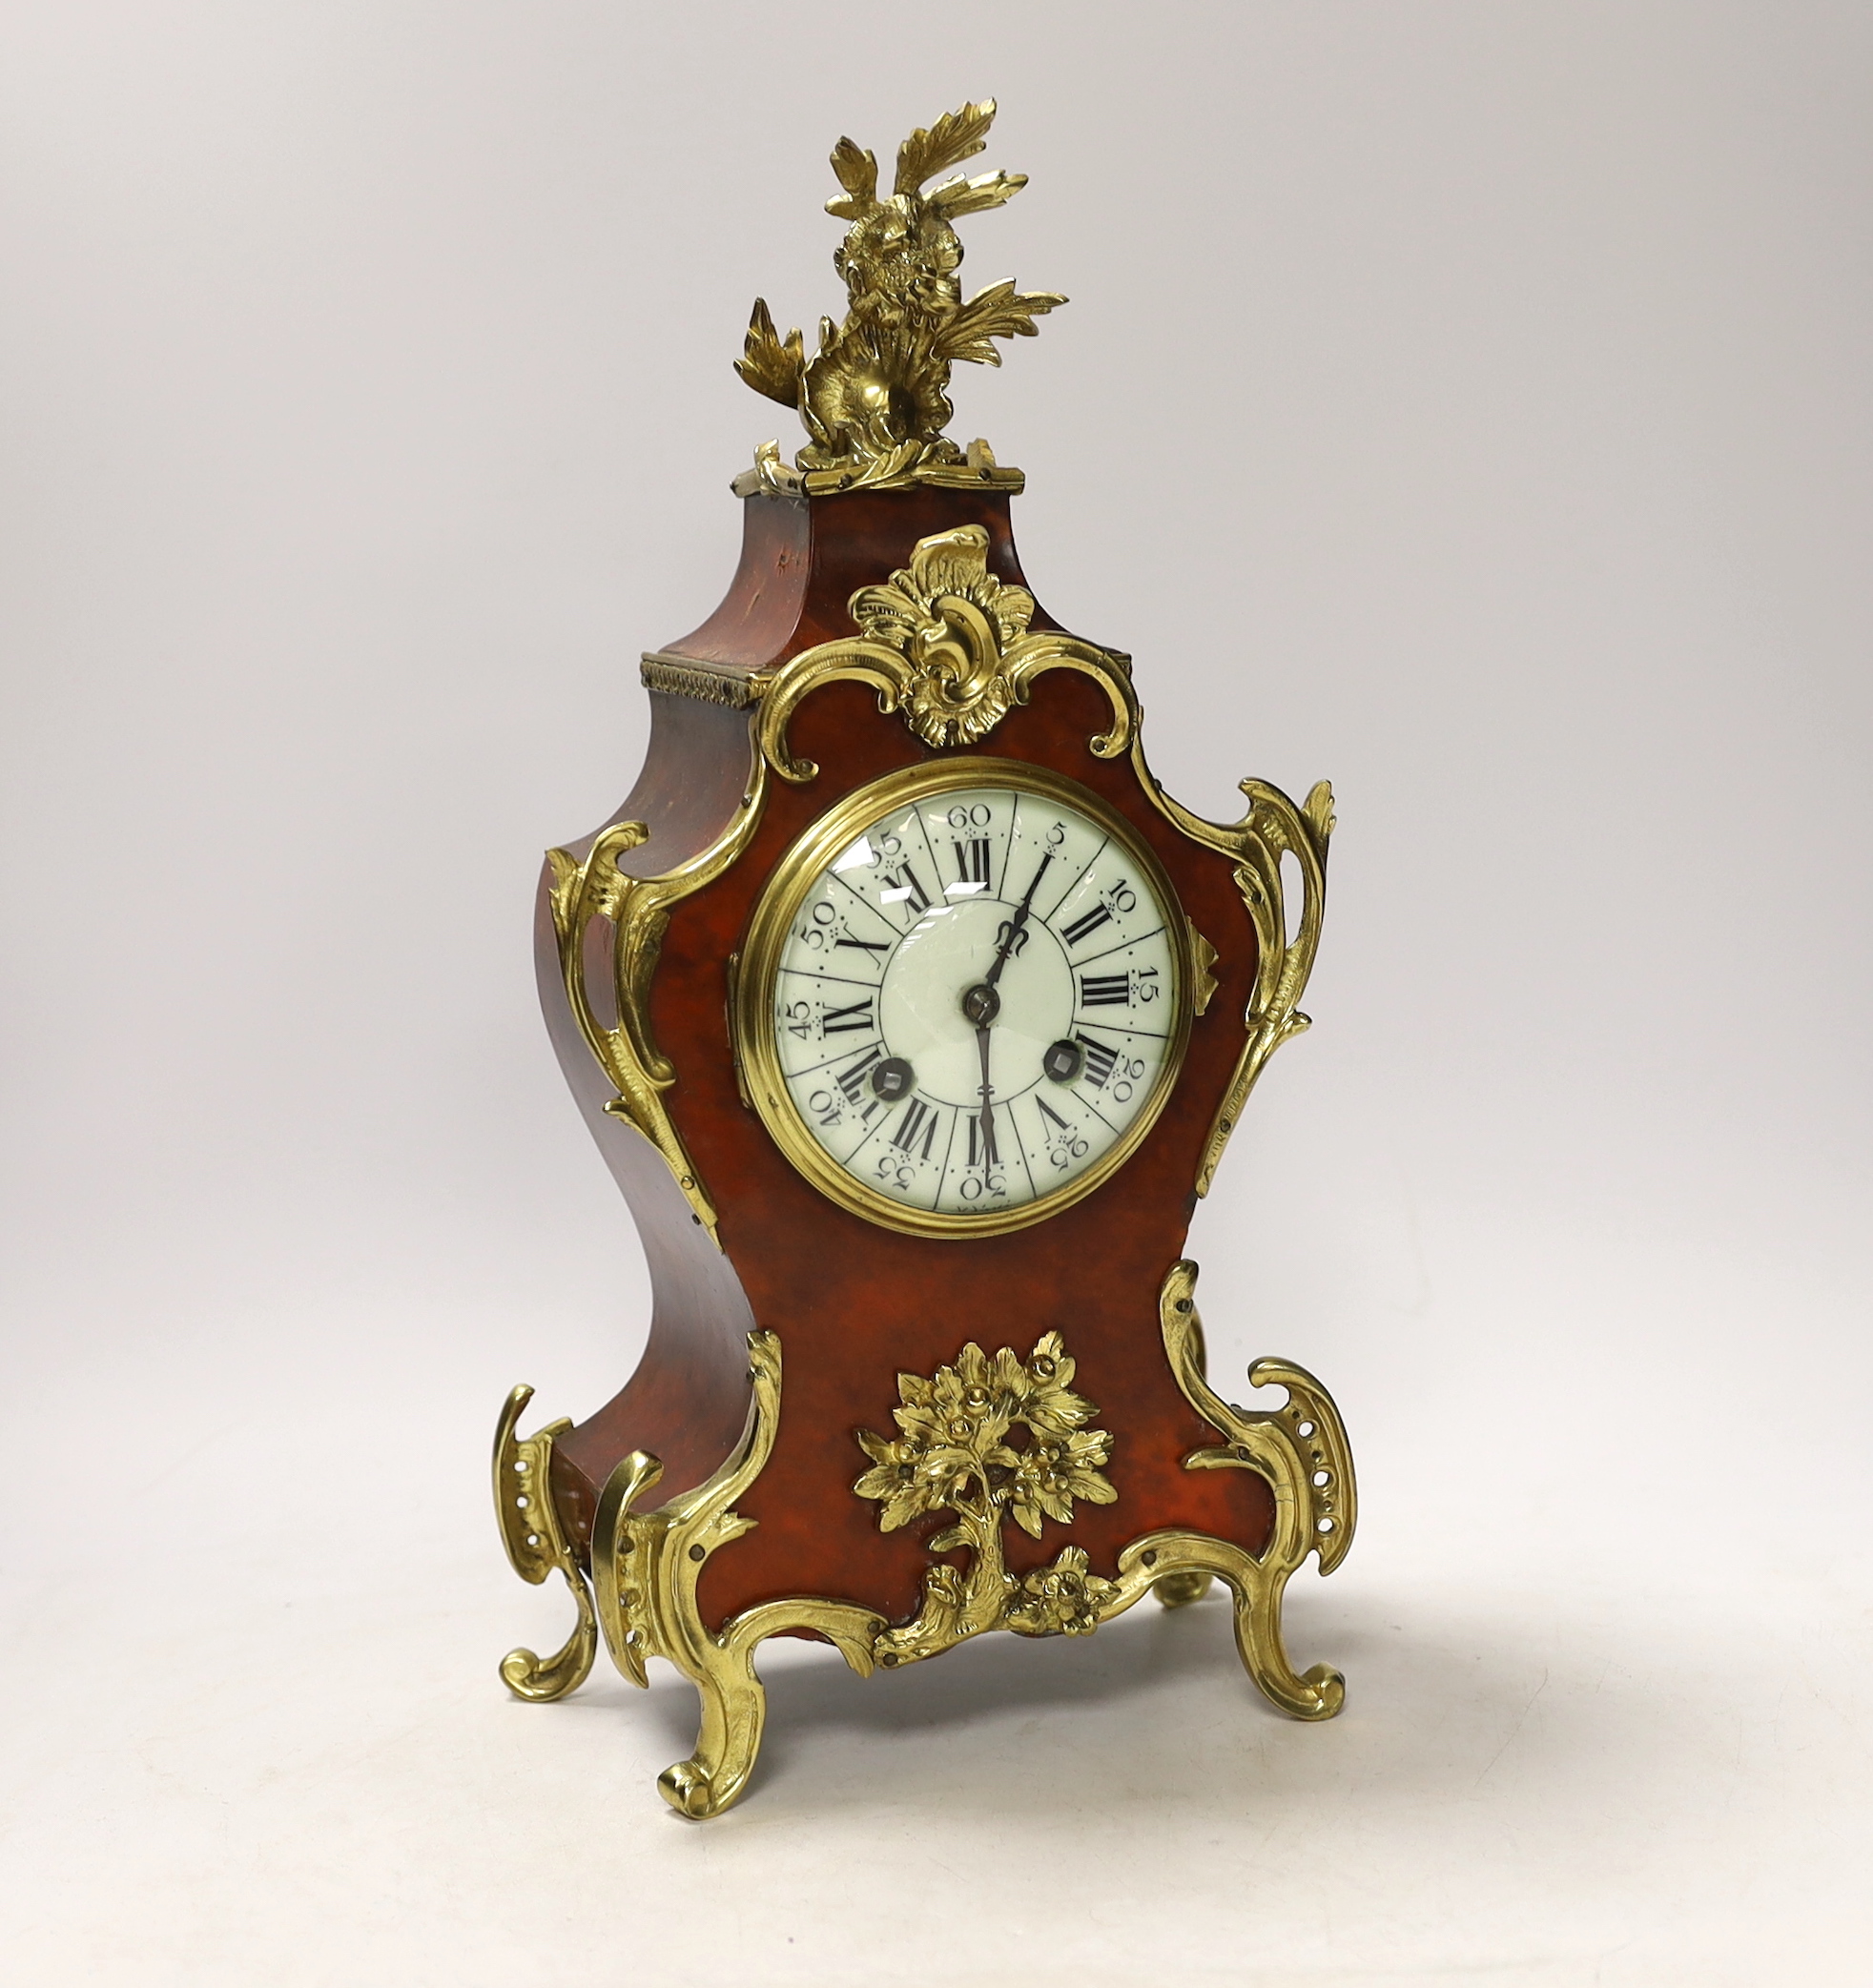 A Louis XV style tortoiseshell and ormolu mounted mantel clock with enamel Roman numeral dial, 35cm high